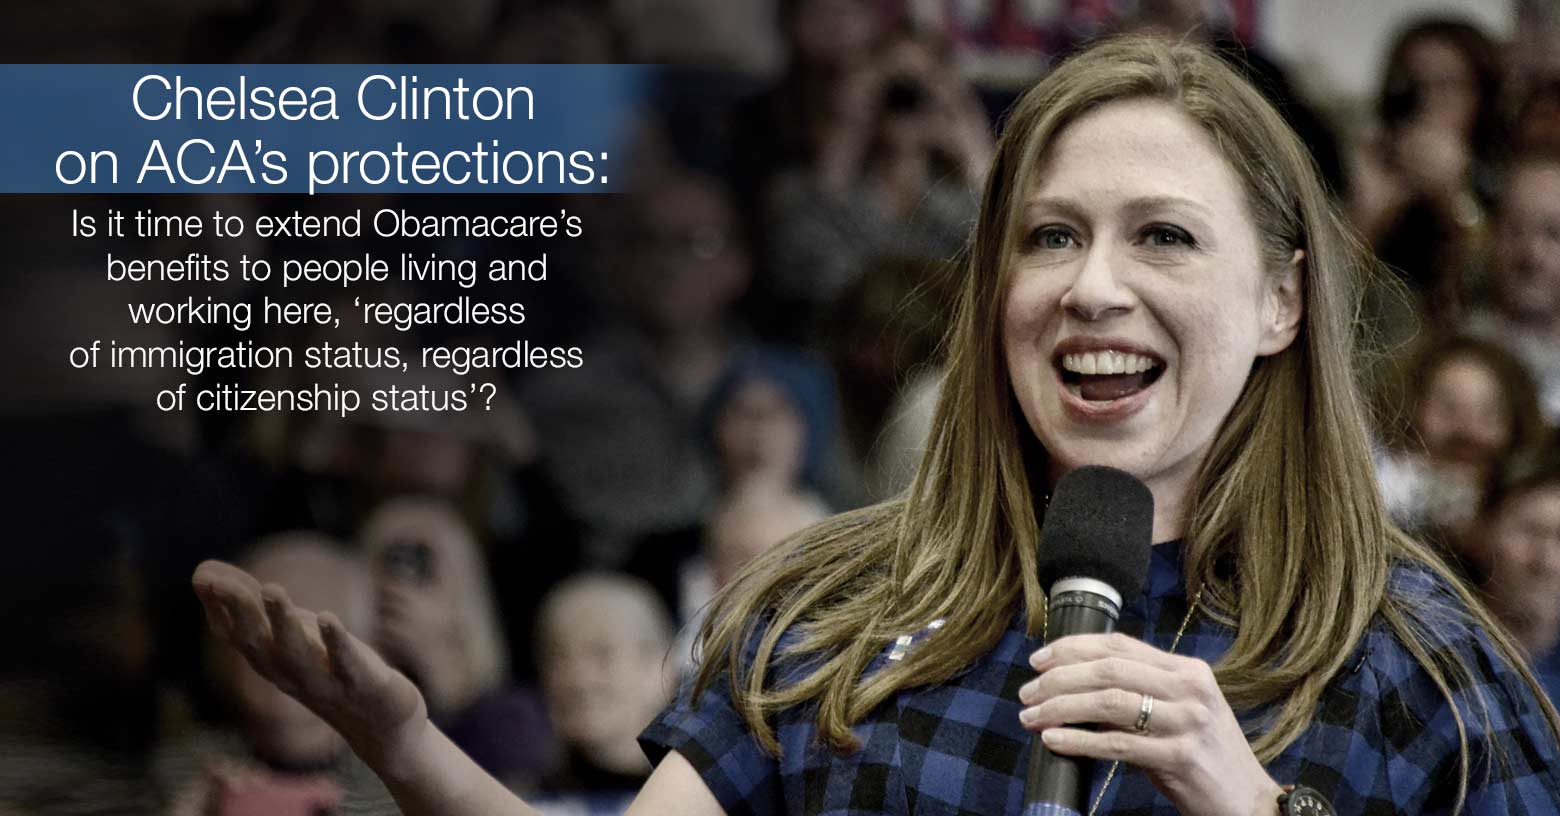 Chelsea Clinton on extending ACA to the undocumented.